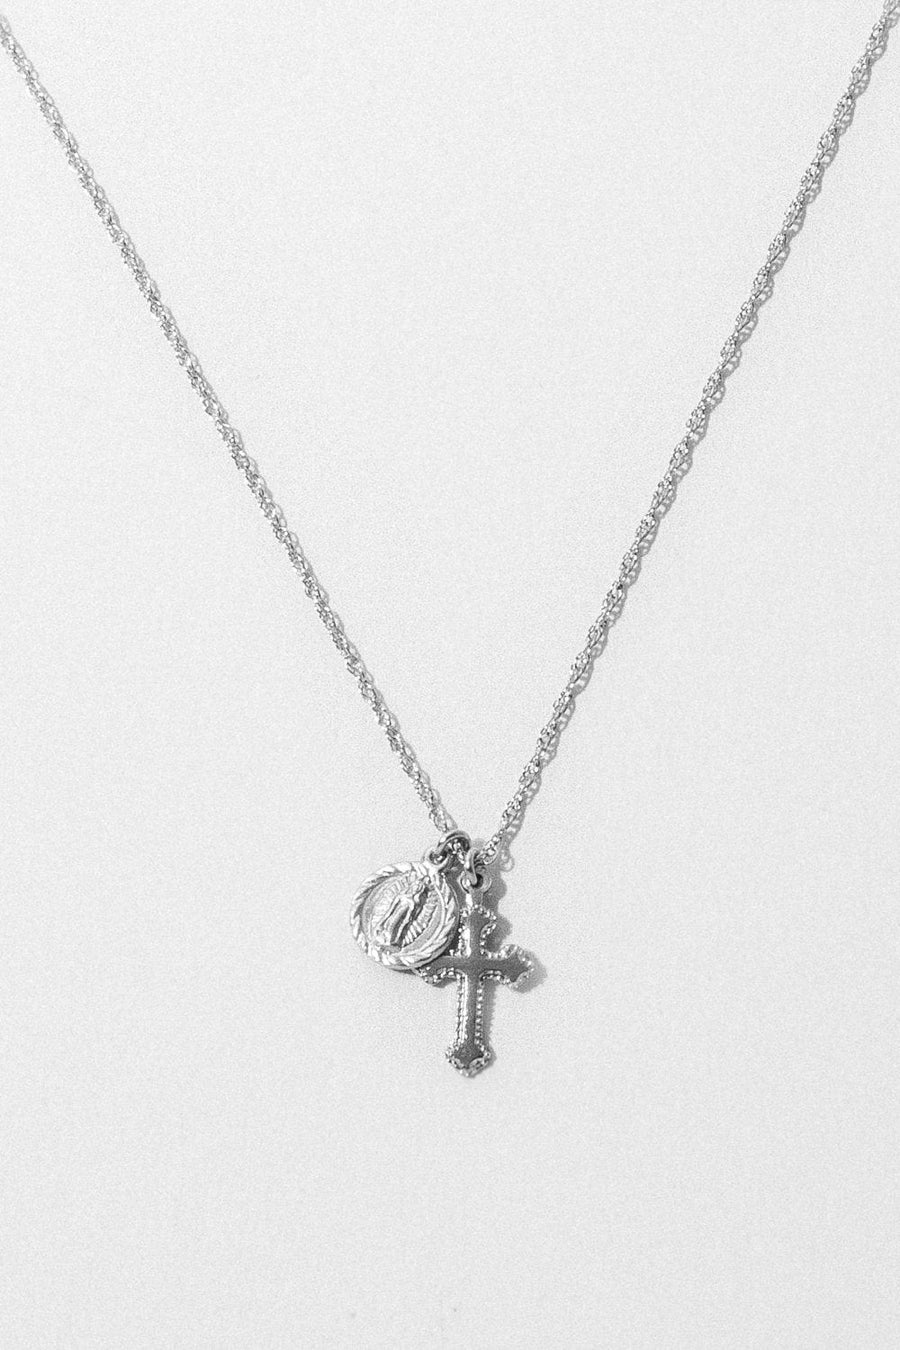 CGM Jewelry Silver / 18 Inches The Hail Mary Dainty Necklace